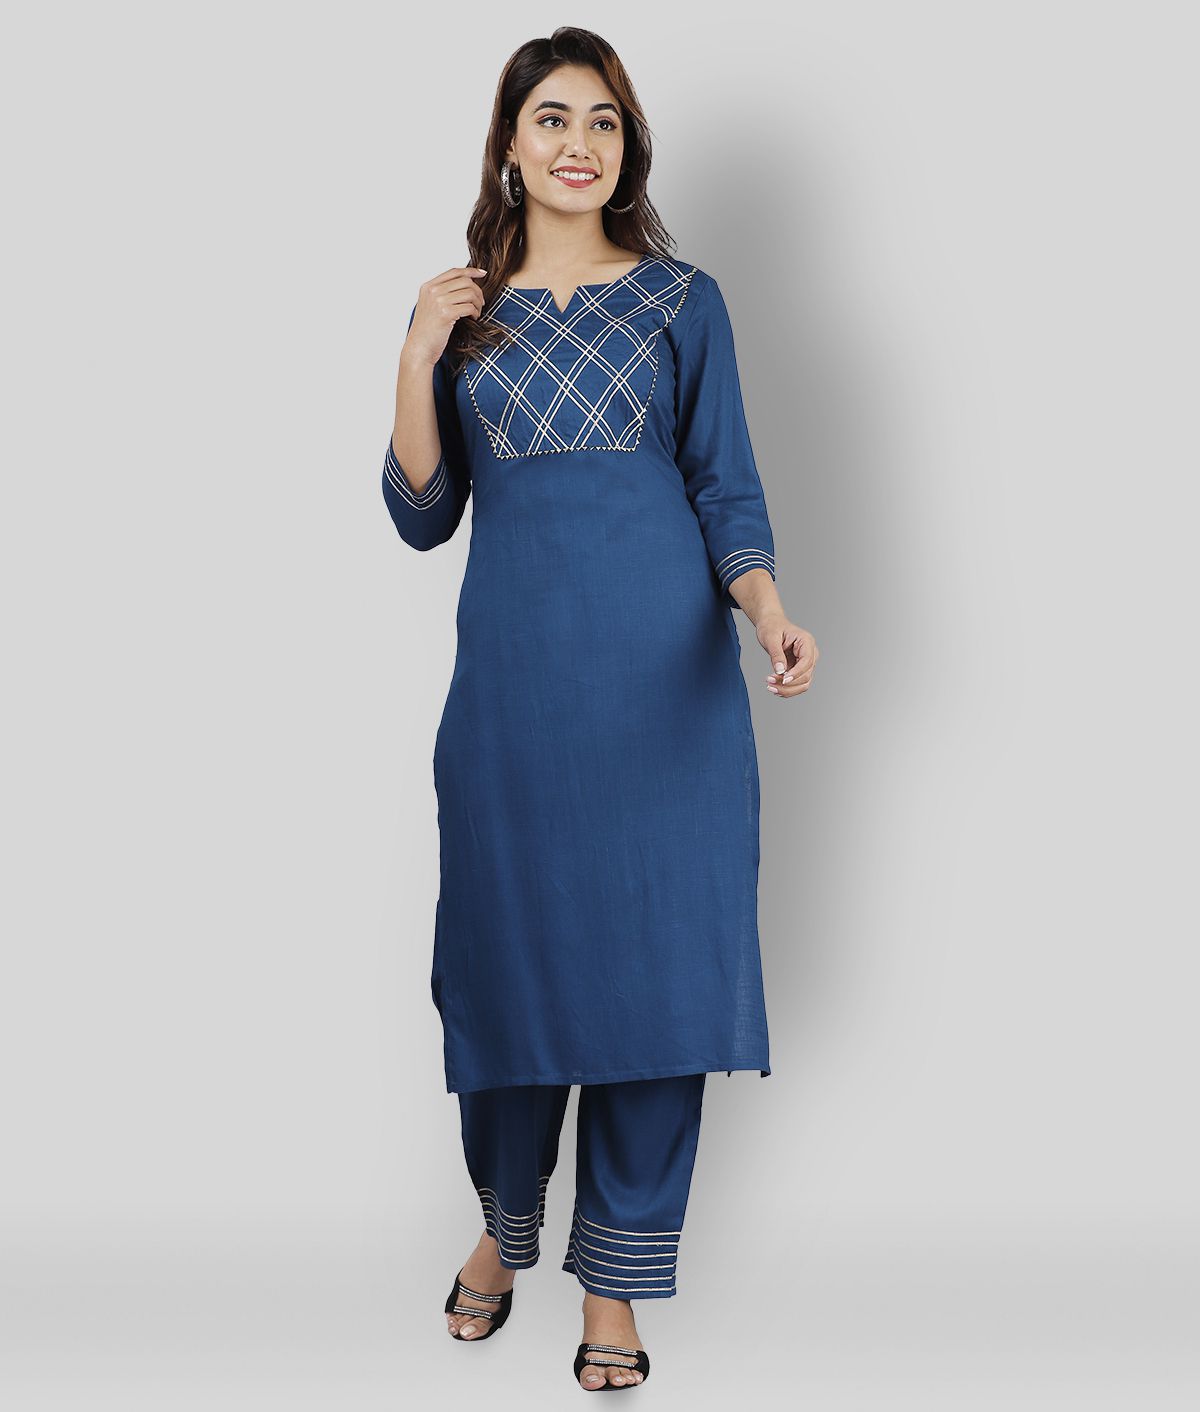     			Doriya - Blue Straight Rayon Women's Stitched Salwar Suit ( Pack of 1 )